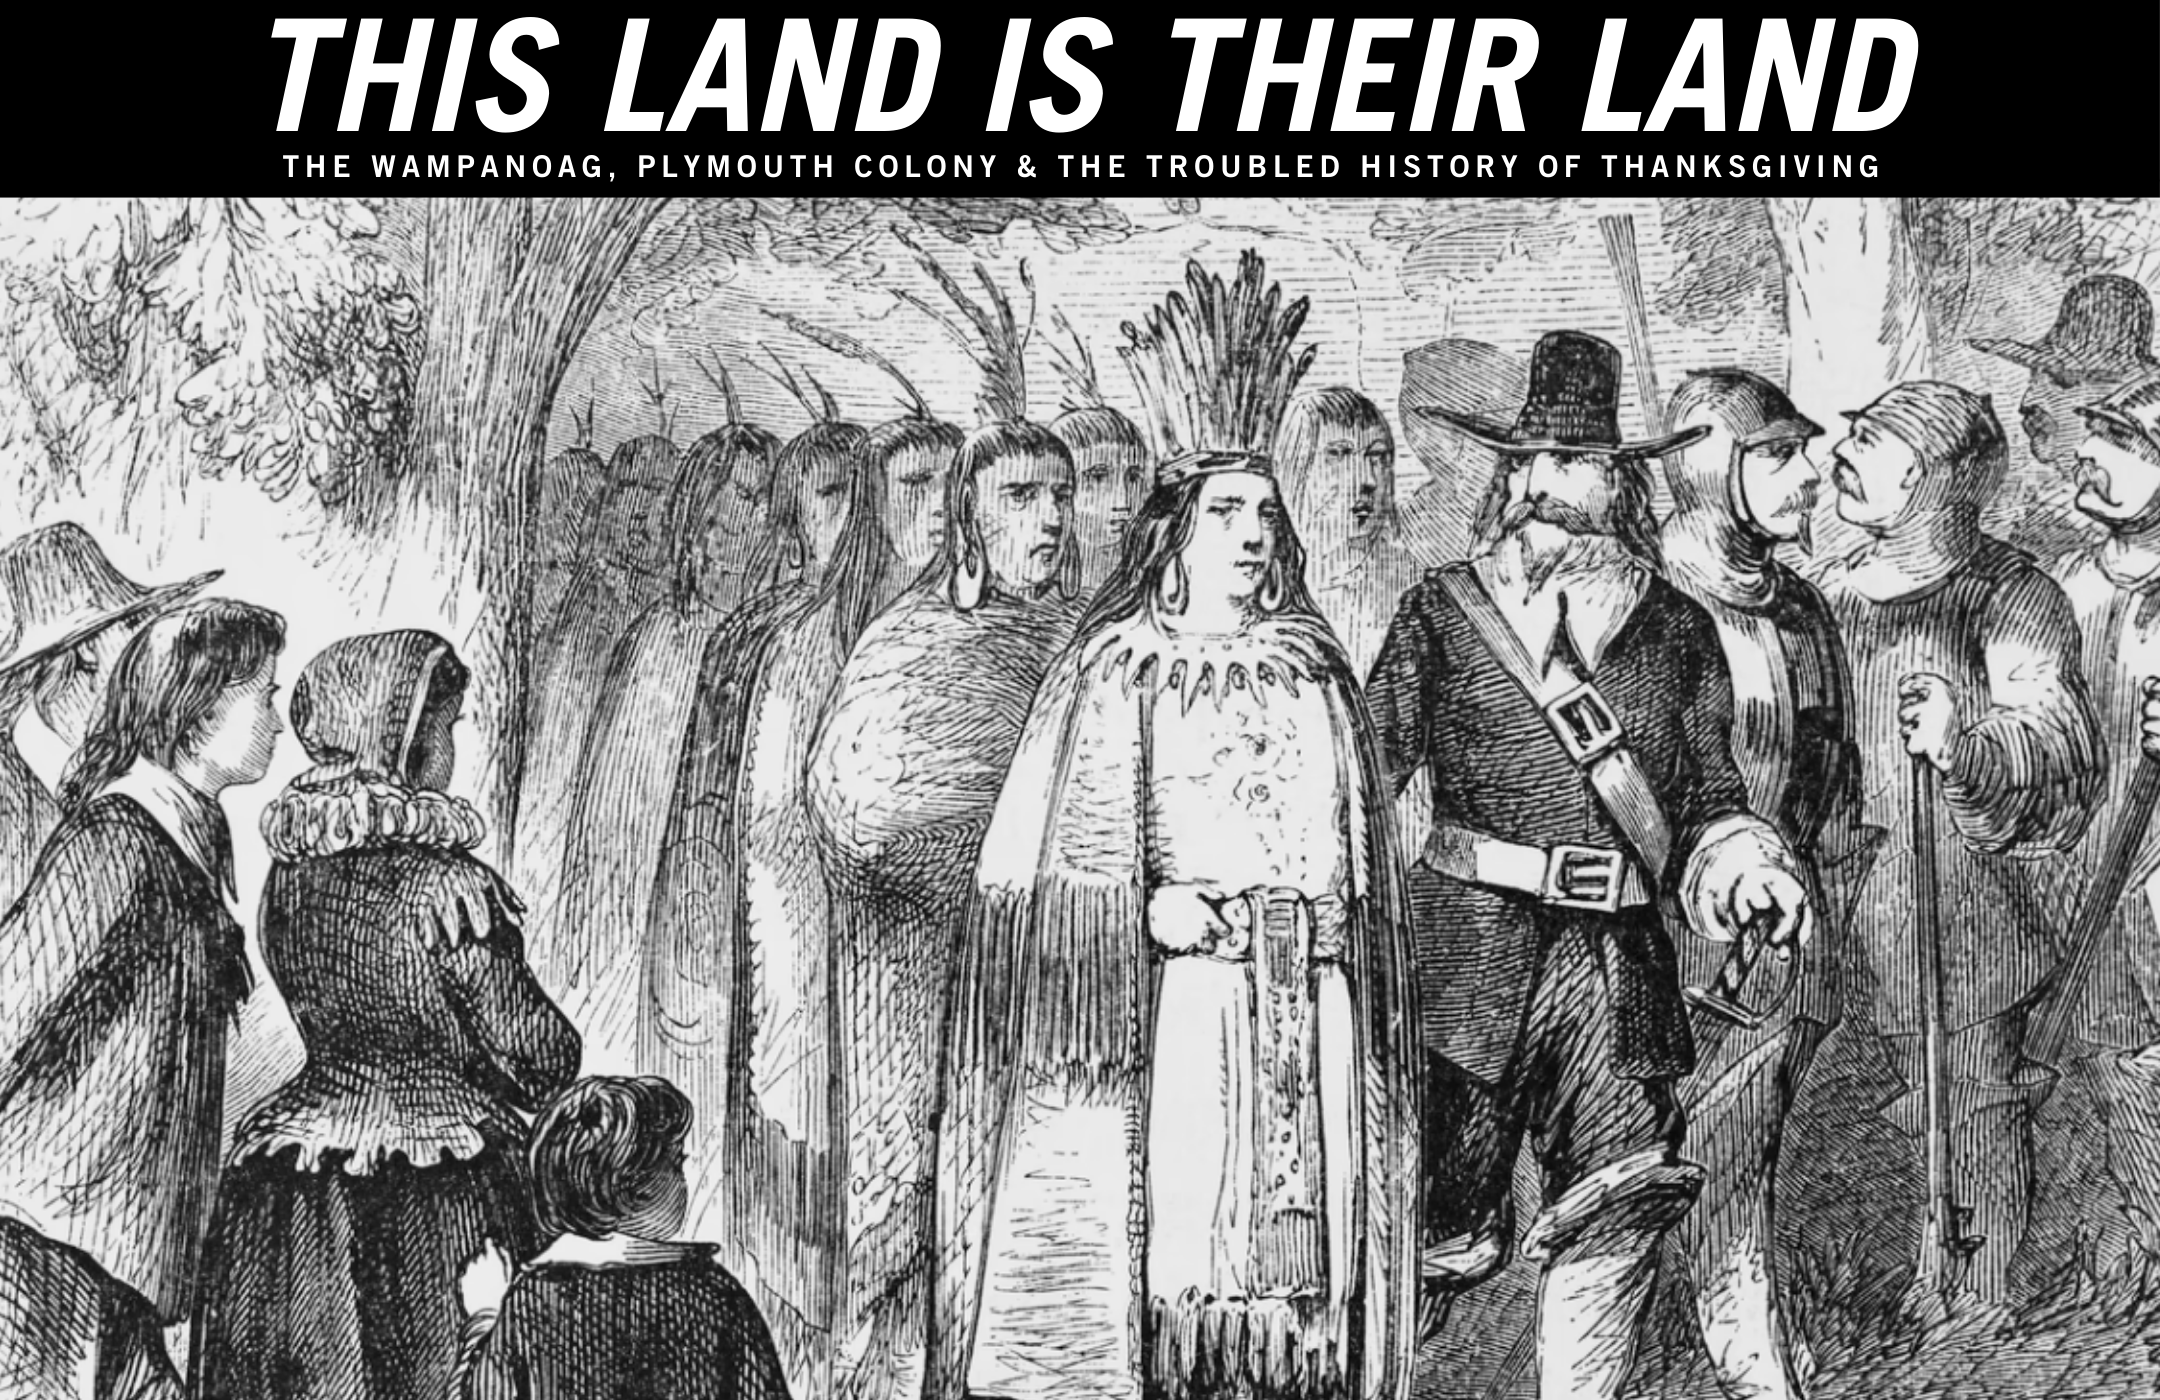 This Land is Their Land - The Wampanoag, Plymouth Colony and the Troubled History of Thanksgiving